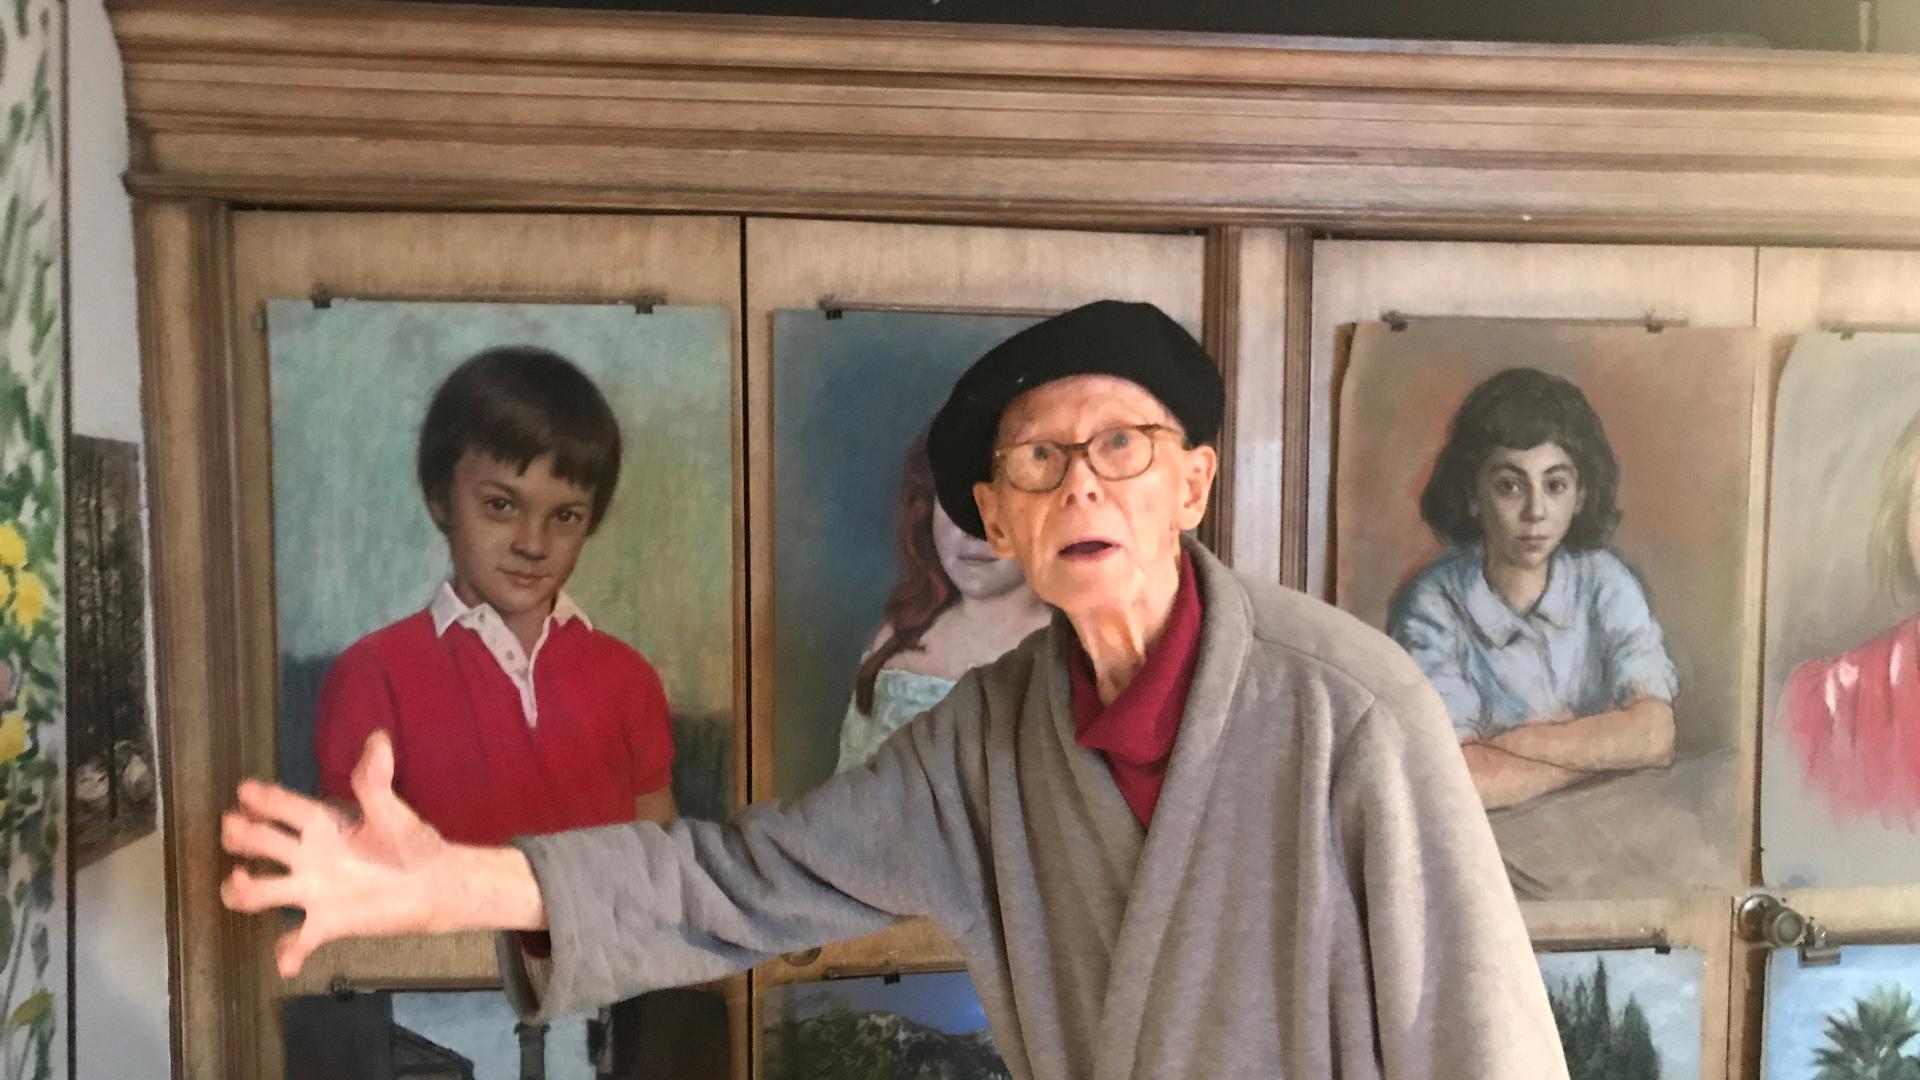 Kalman Aron began sketching when he was 3 years old. He's now 93, and says if he didn't still paint and draw every day he would "die of boredom."